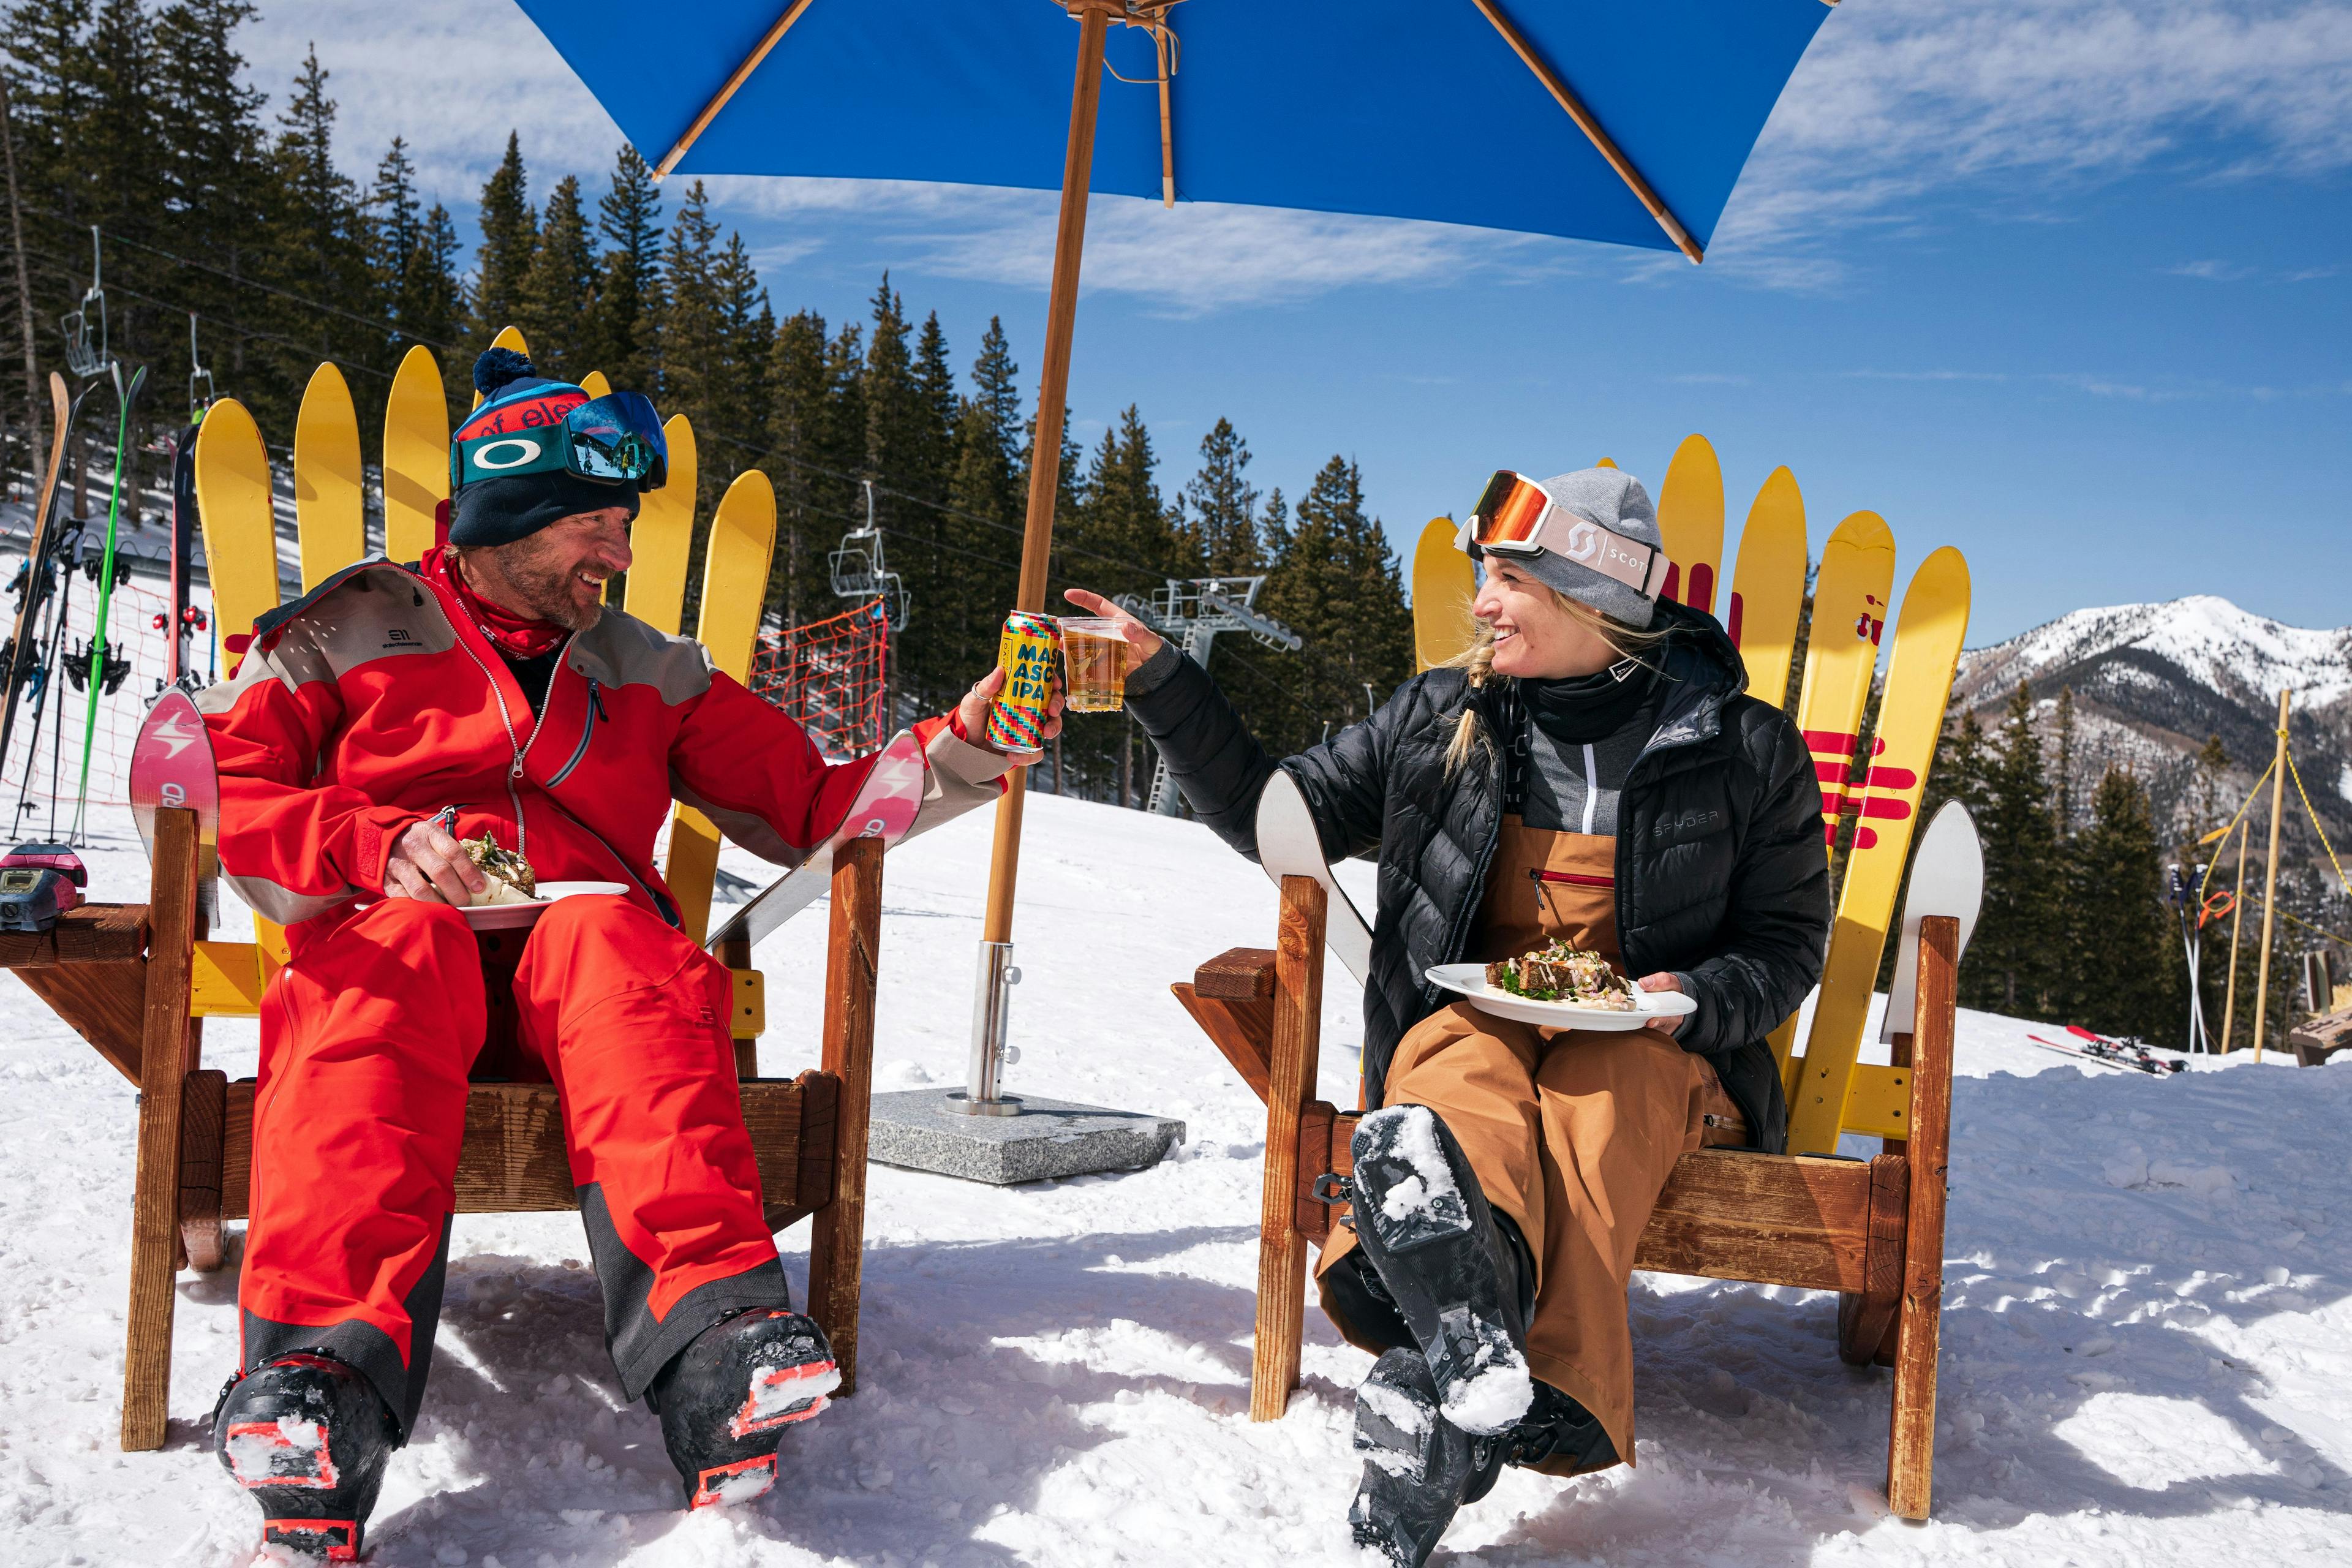 Two skiers cheers their beverages on a sunny day outside the Whistlestop Cafe